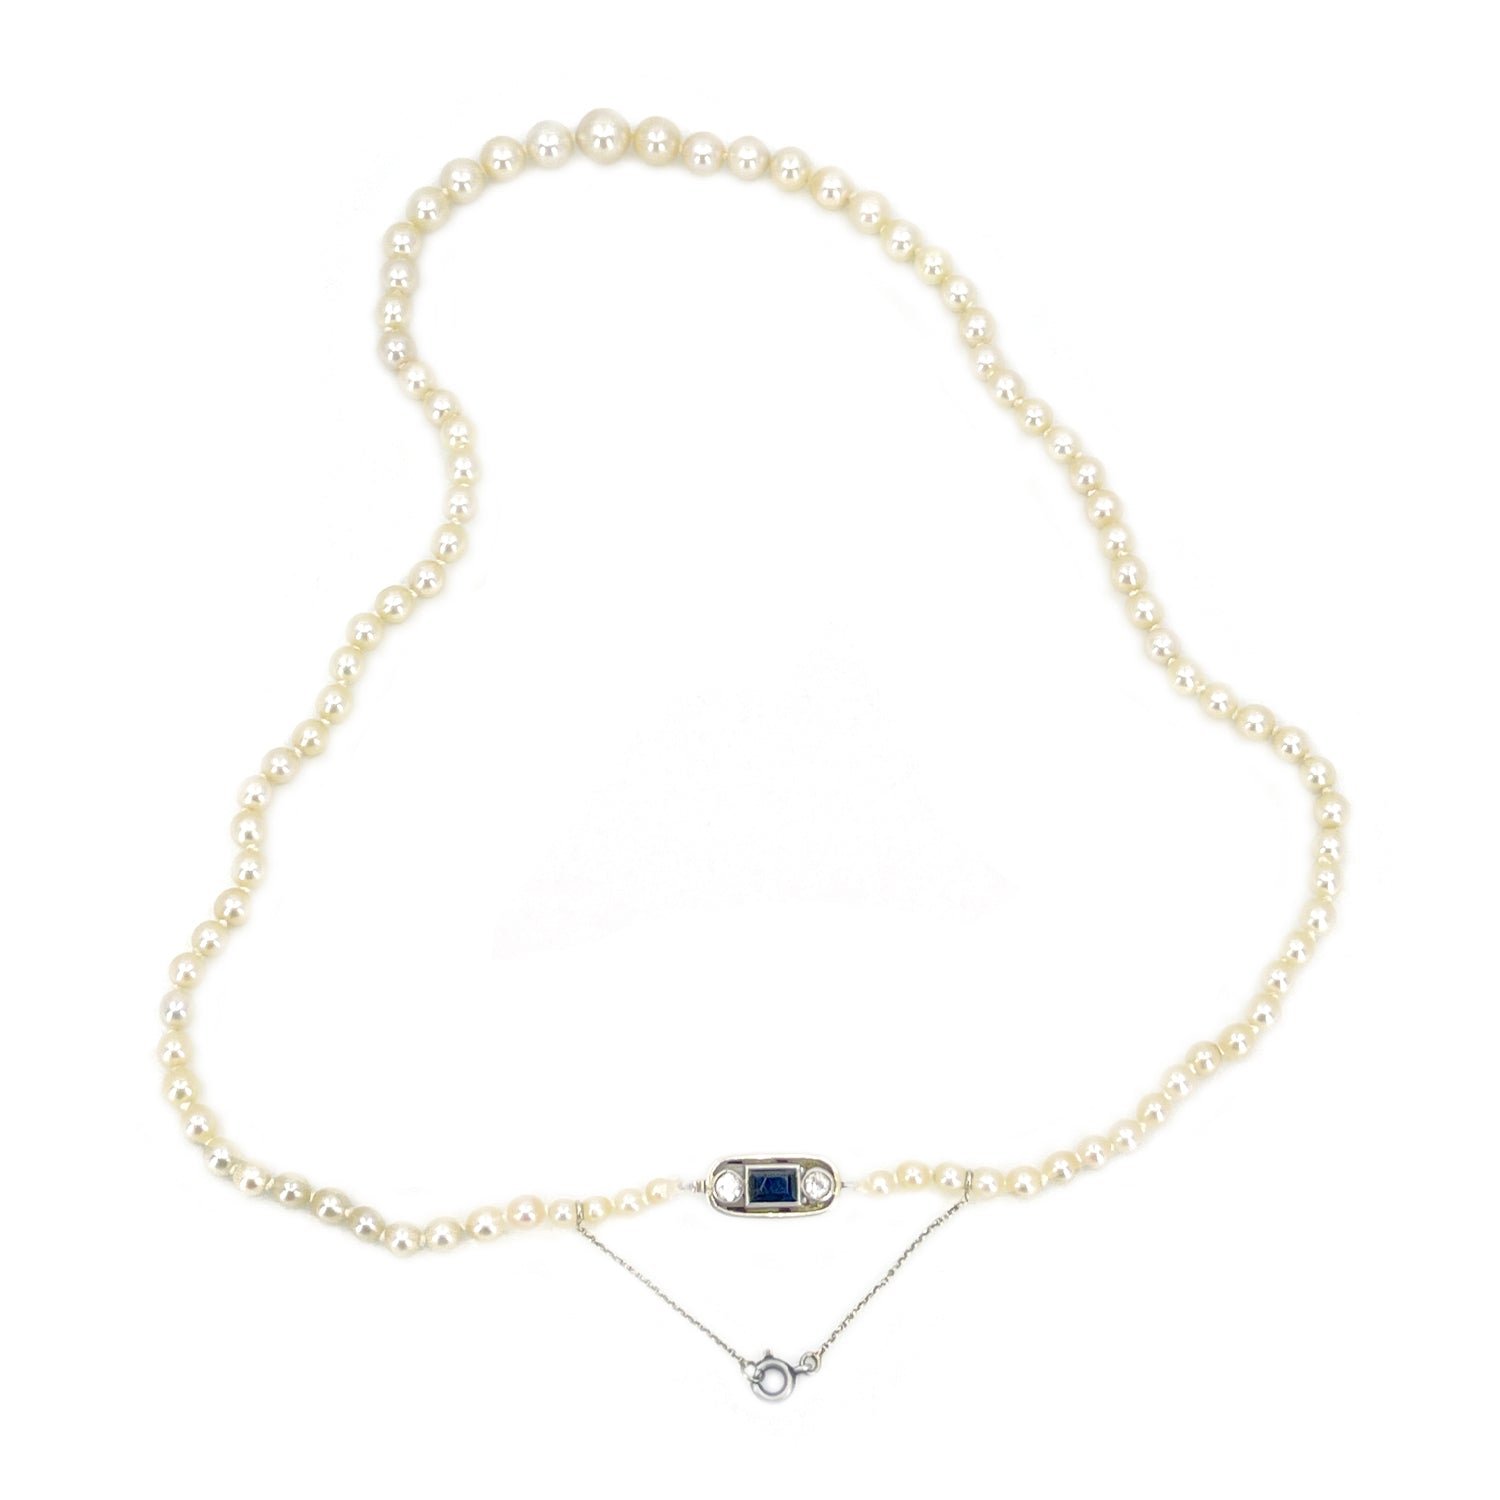 French Art Deco Japanese Cultured Akoya Pearl Spinel Paste Necklace -Sterling Silver 20.50 Inch